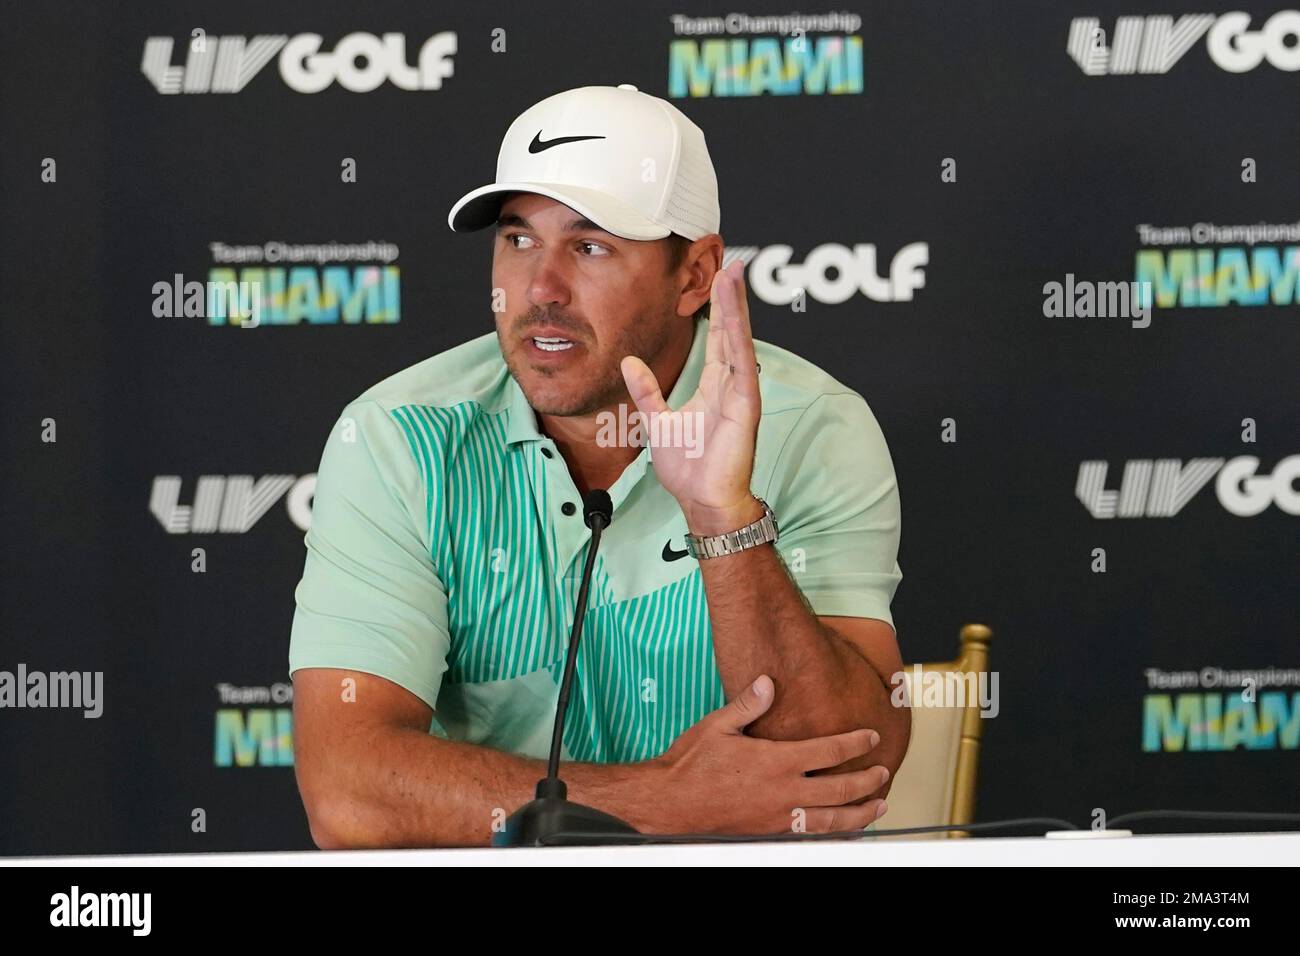 Brooks Koepka speaks during a news conference for the LIV Golf Team Championship at Trump National Doral Golf Club, Wednesday, Oct